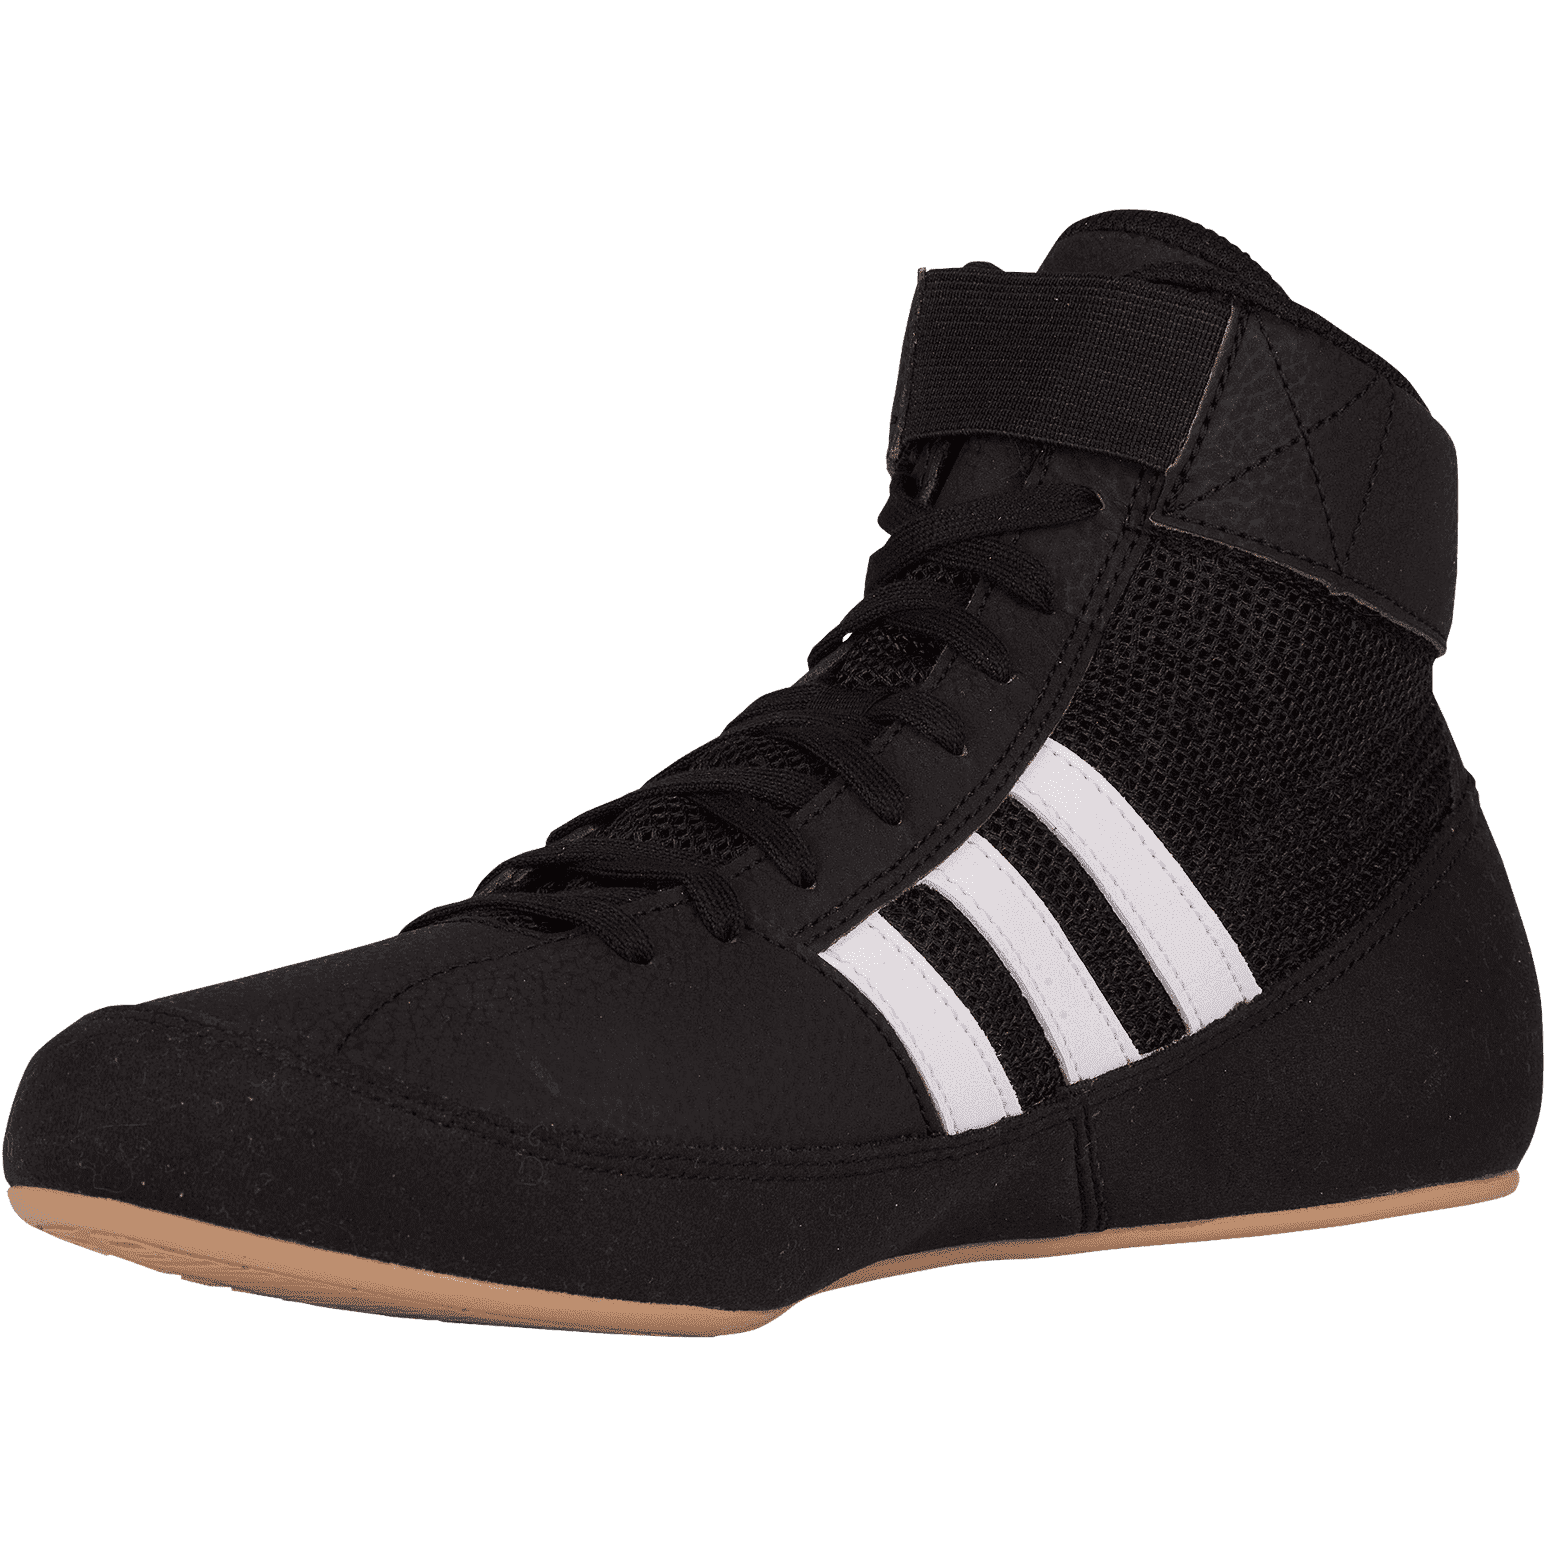 Adidas 222 HVC 2 Youth Laced Wrestling Shoes - Black White Gum